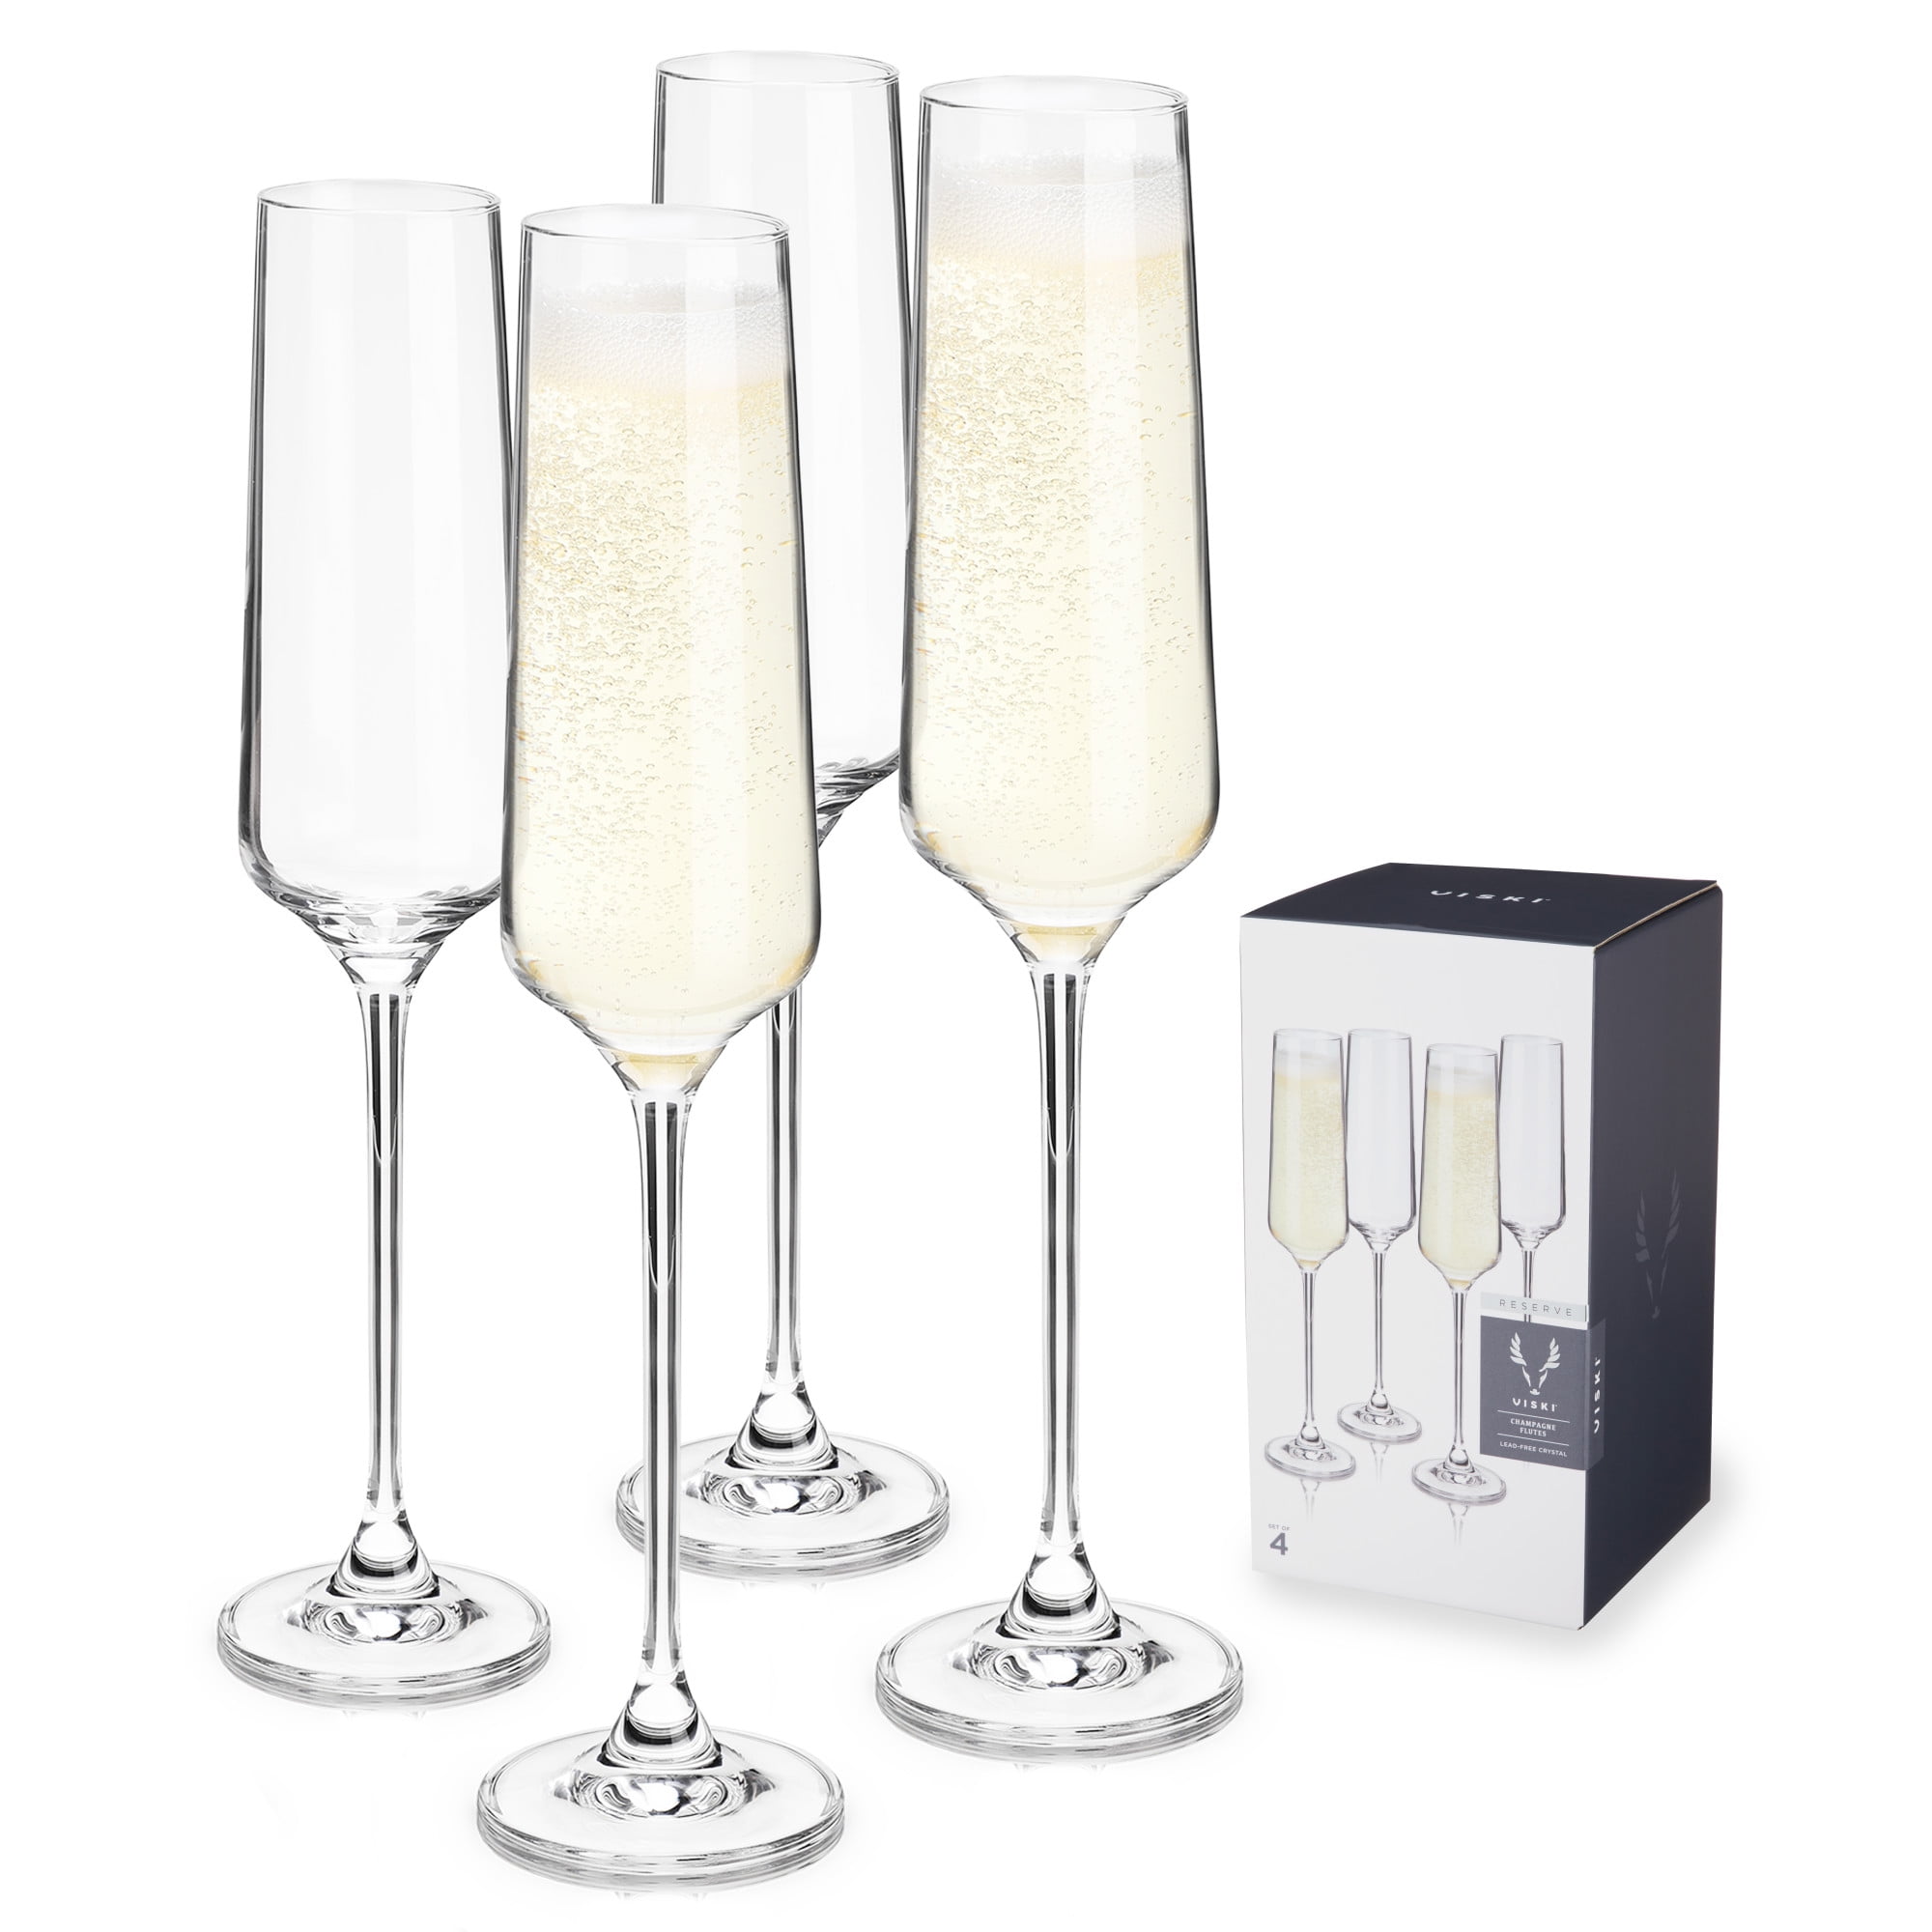 Viski Reserve Inez Crystal Champagne Flutes - European Crafted Champagne  Glasses Set of 4 - 6oz Stemmed Sparkling Wine Glasses for Wedding or  Anniversary and Special Occasions Gift Ideas